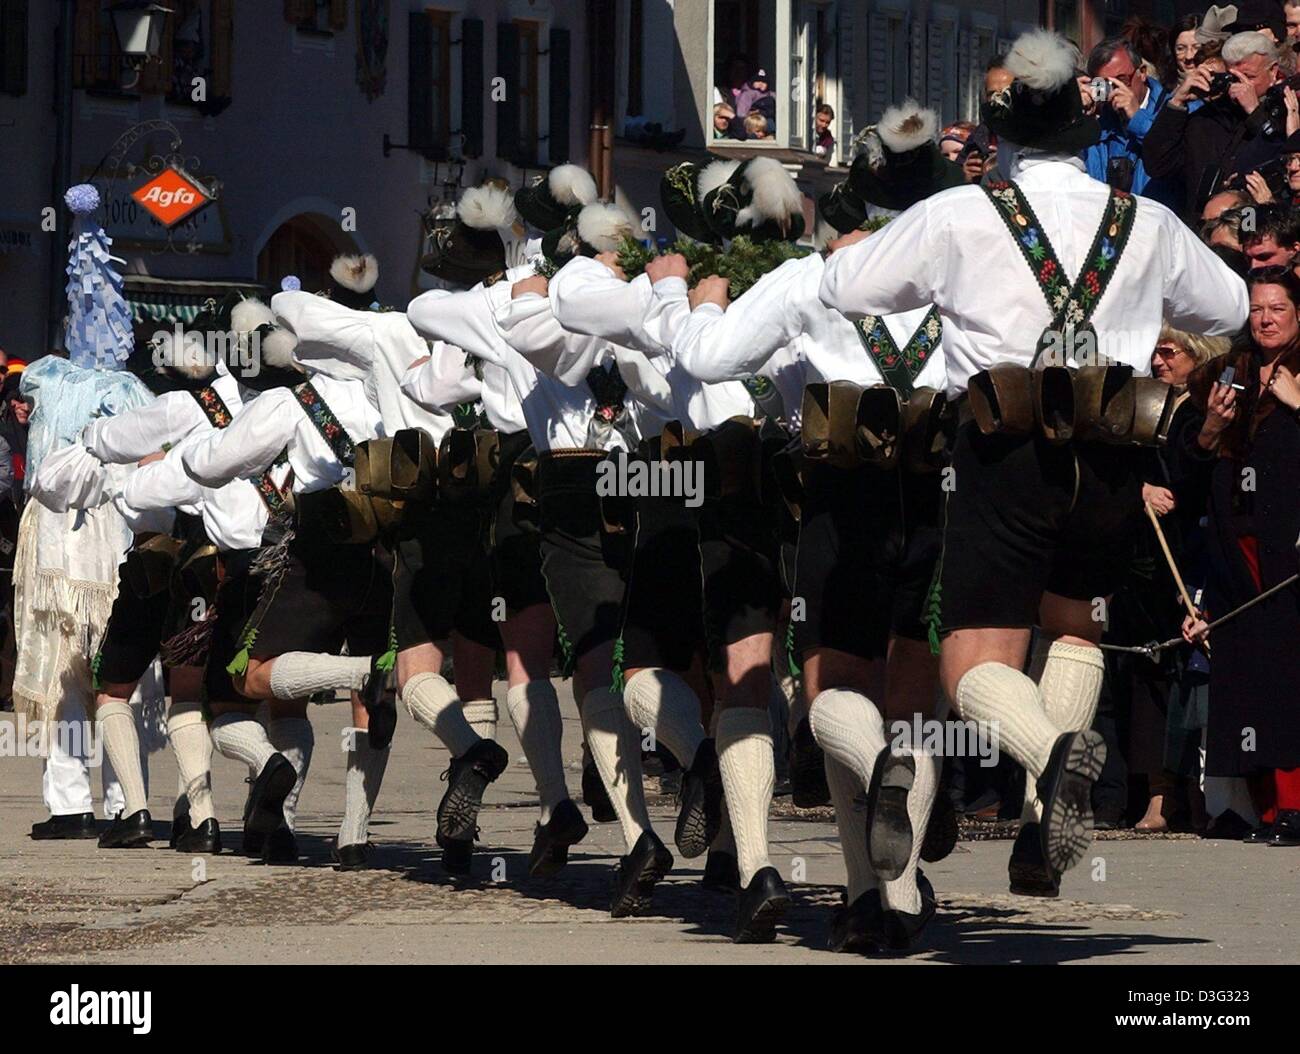 (dpa) - Masked men clad in identical Bavarian lederhosen (leather shorts) parade along a street while ringing cow bells in Mittenwald, Bavaria, Germany, 27 February 2003. As a carnival tradition, these 'bell stirrers' ('Schellenruehrer') and their noise are meant to scare off the mean winter demons. Stock Photo